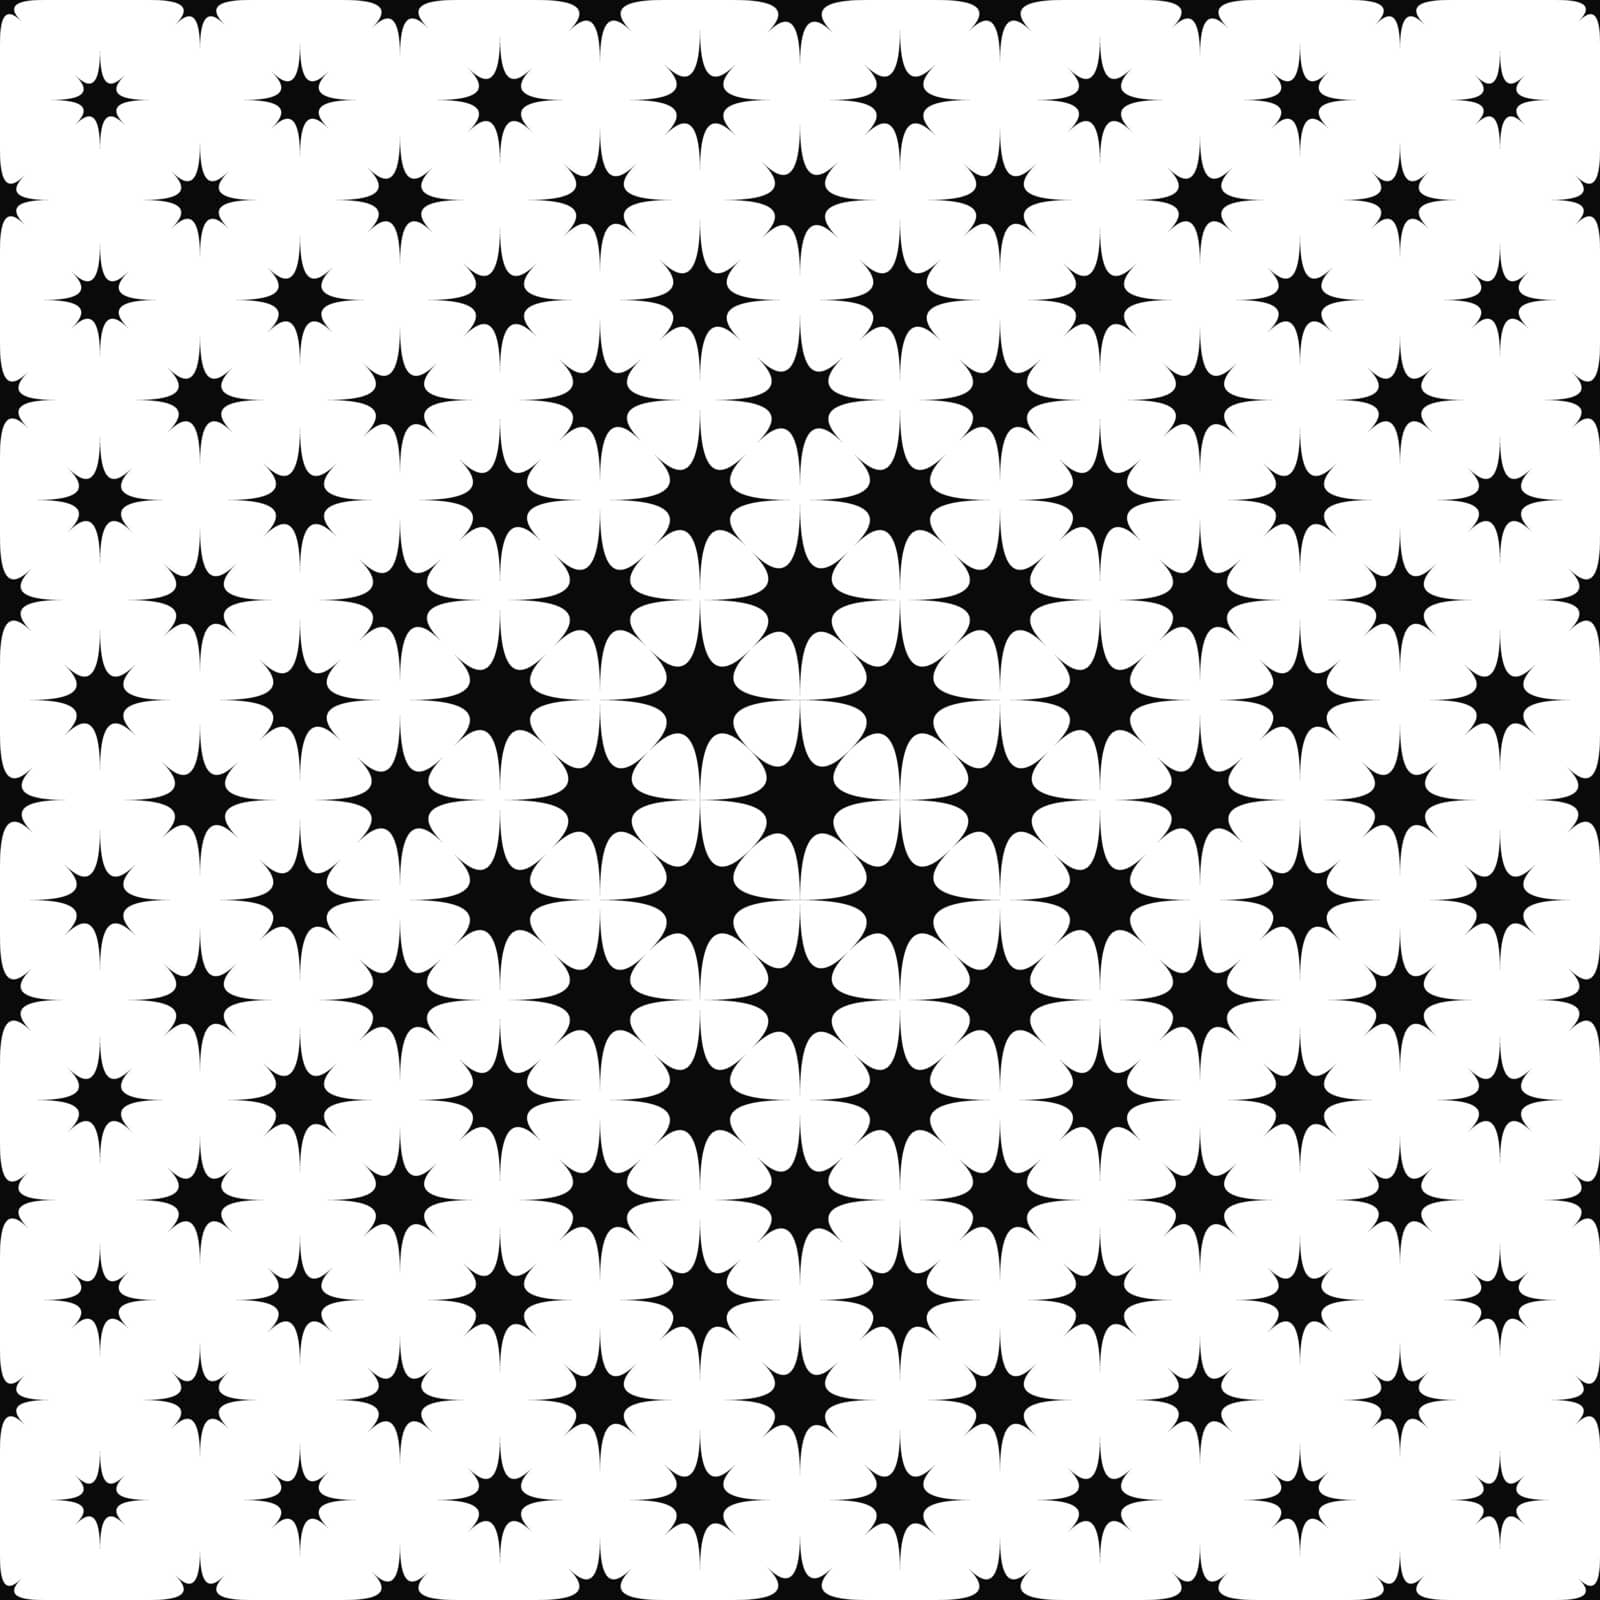 Monochrome repeating curved star vector pattern design